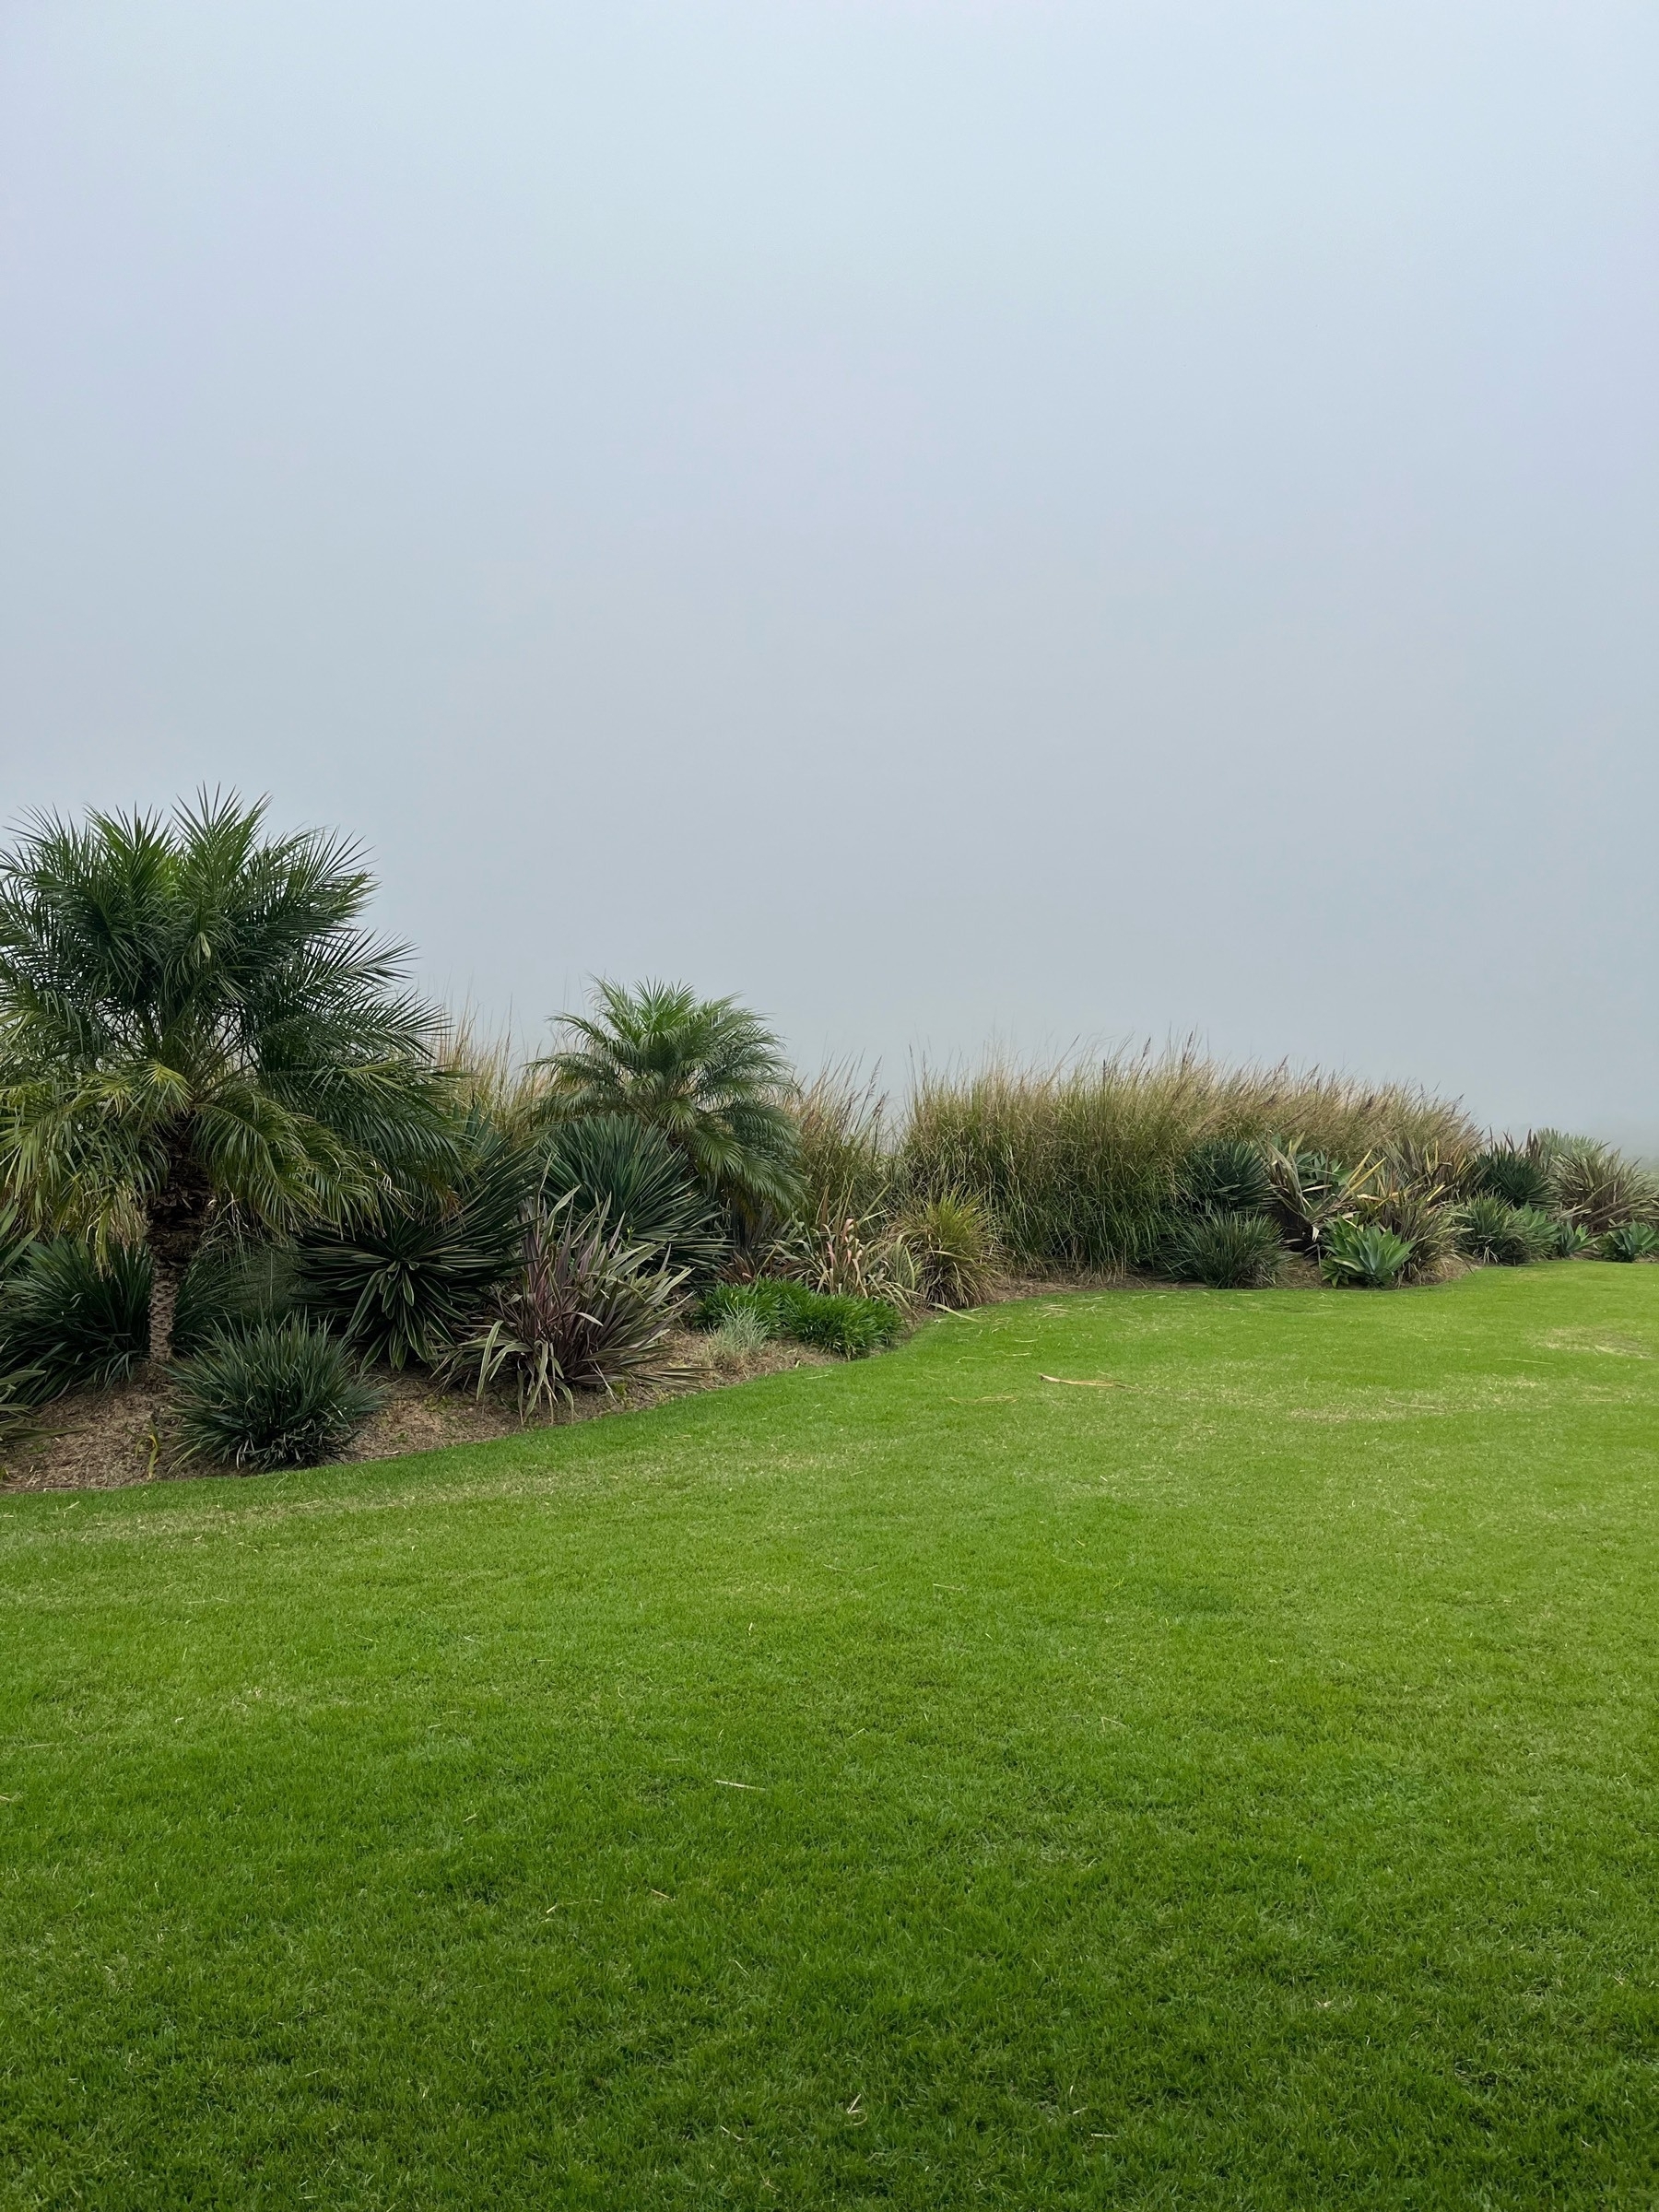 Grass in the foreground, a shrubbery bed behind that, and a dark misty sky above it all